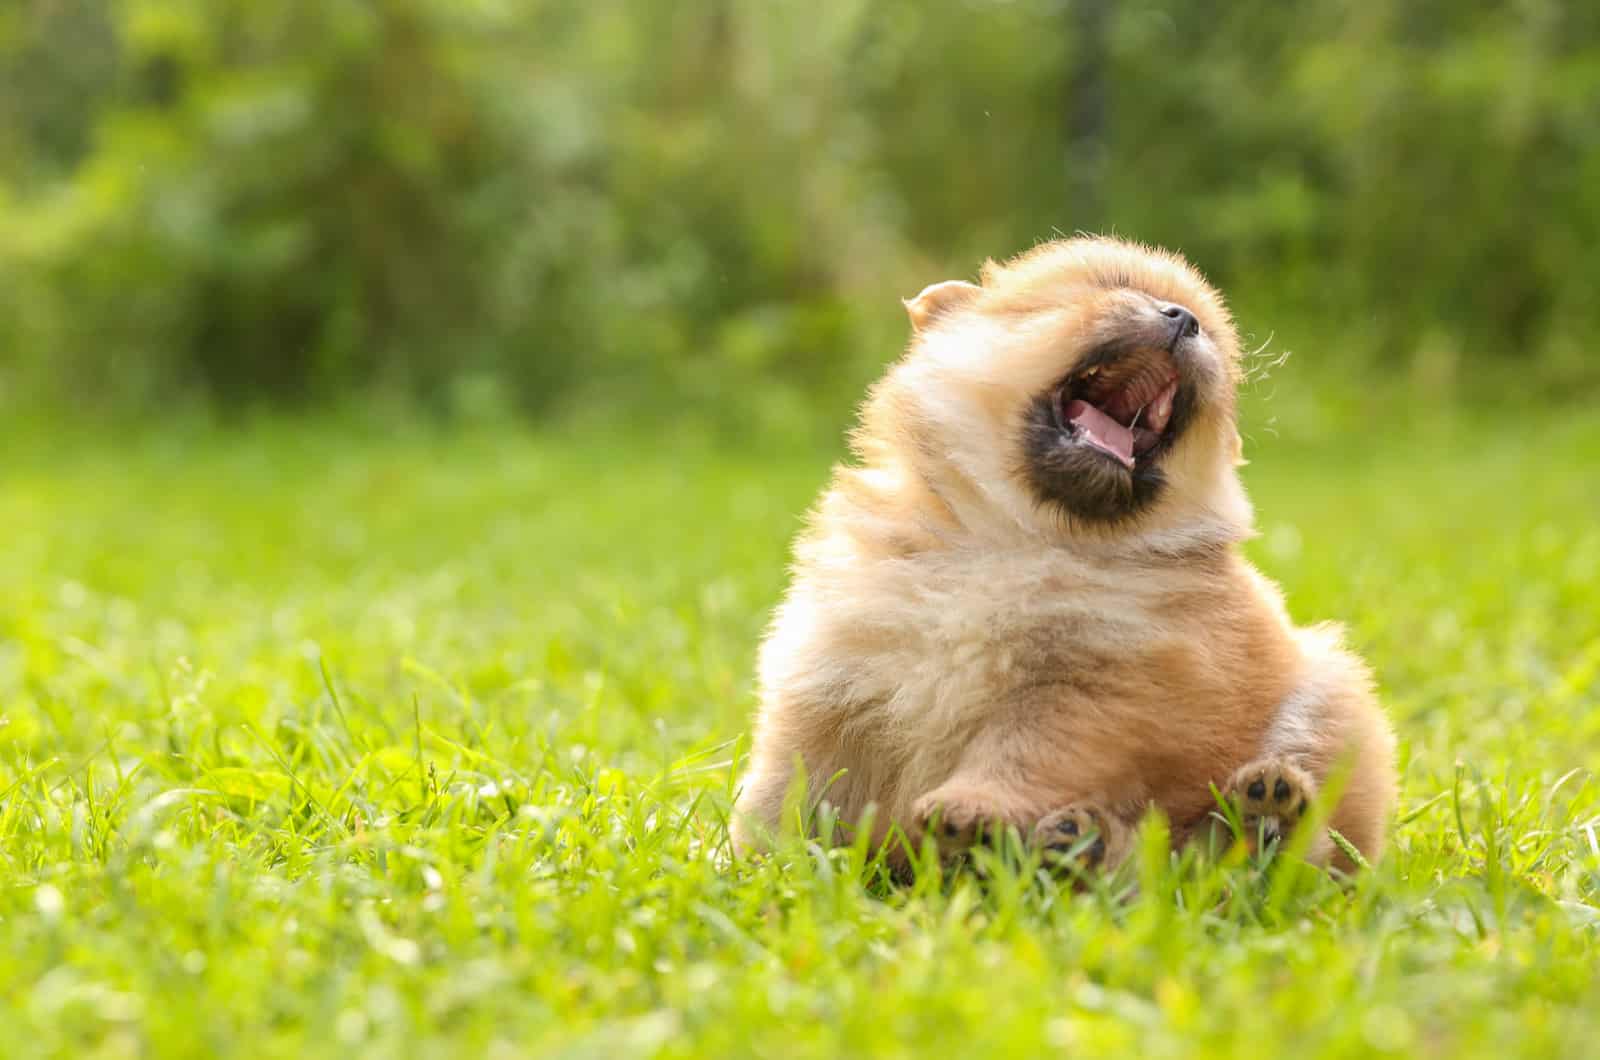 sneezing puppy playing outside